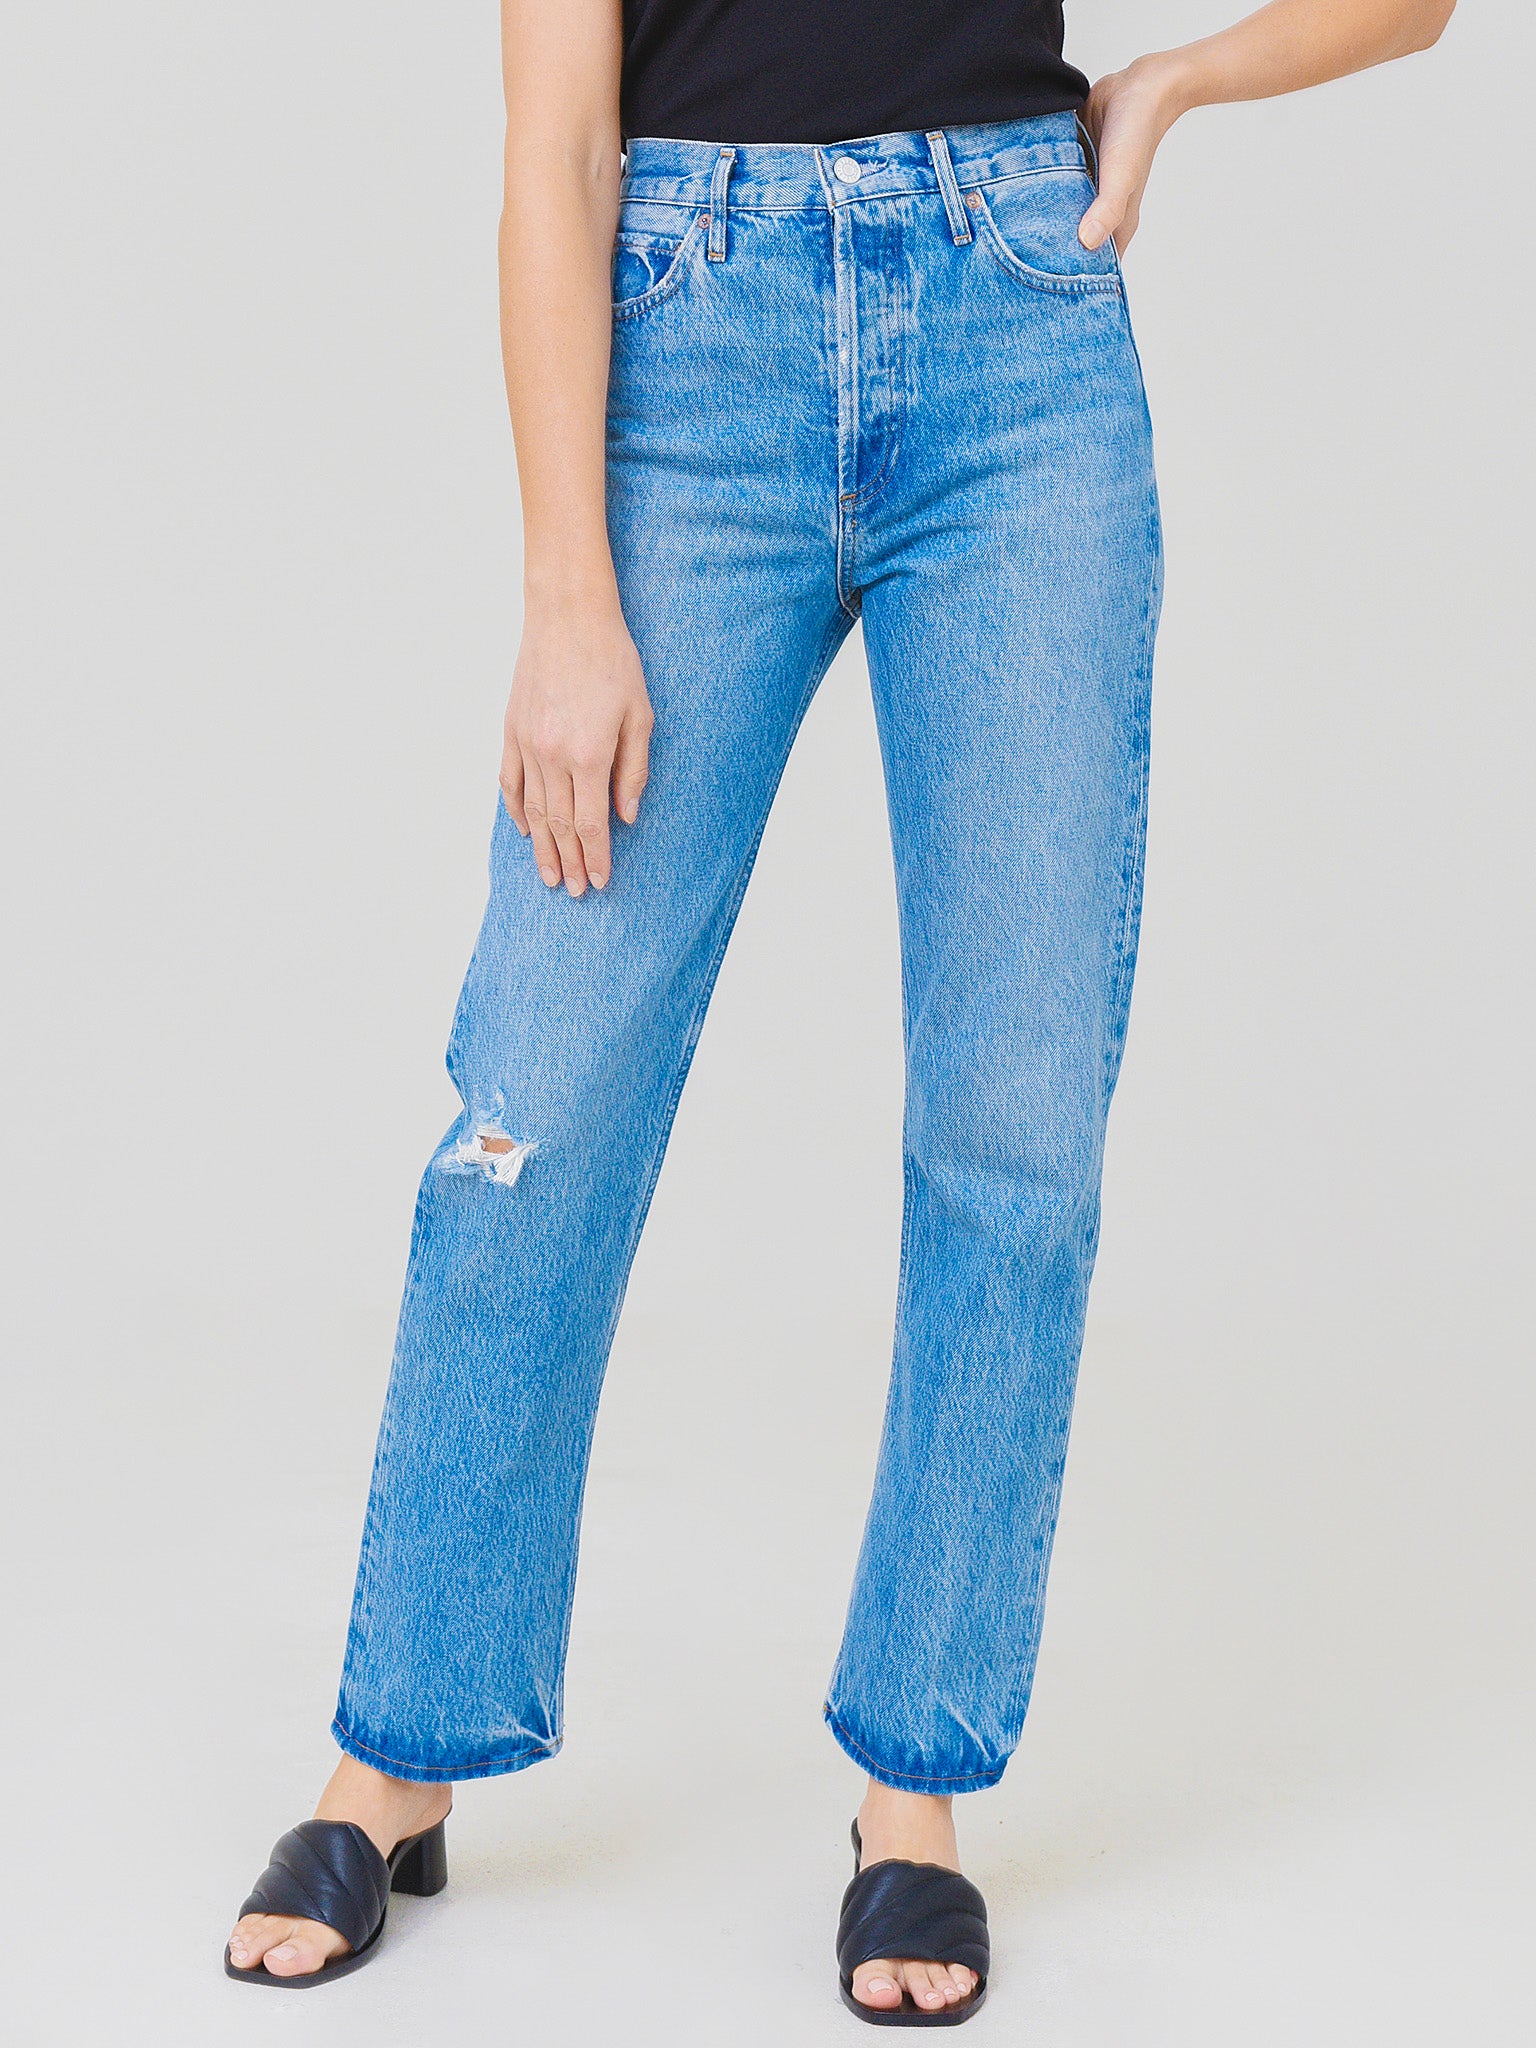 cooper cargo jeans woman blue in cotton - AGOLDE - d — 2